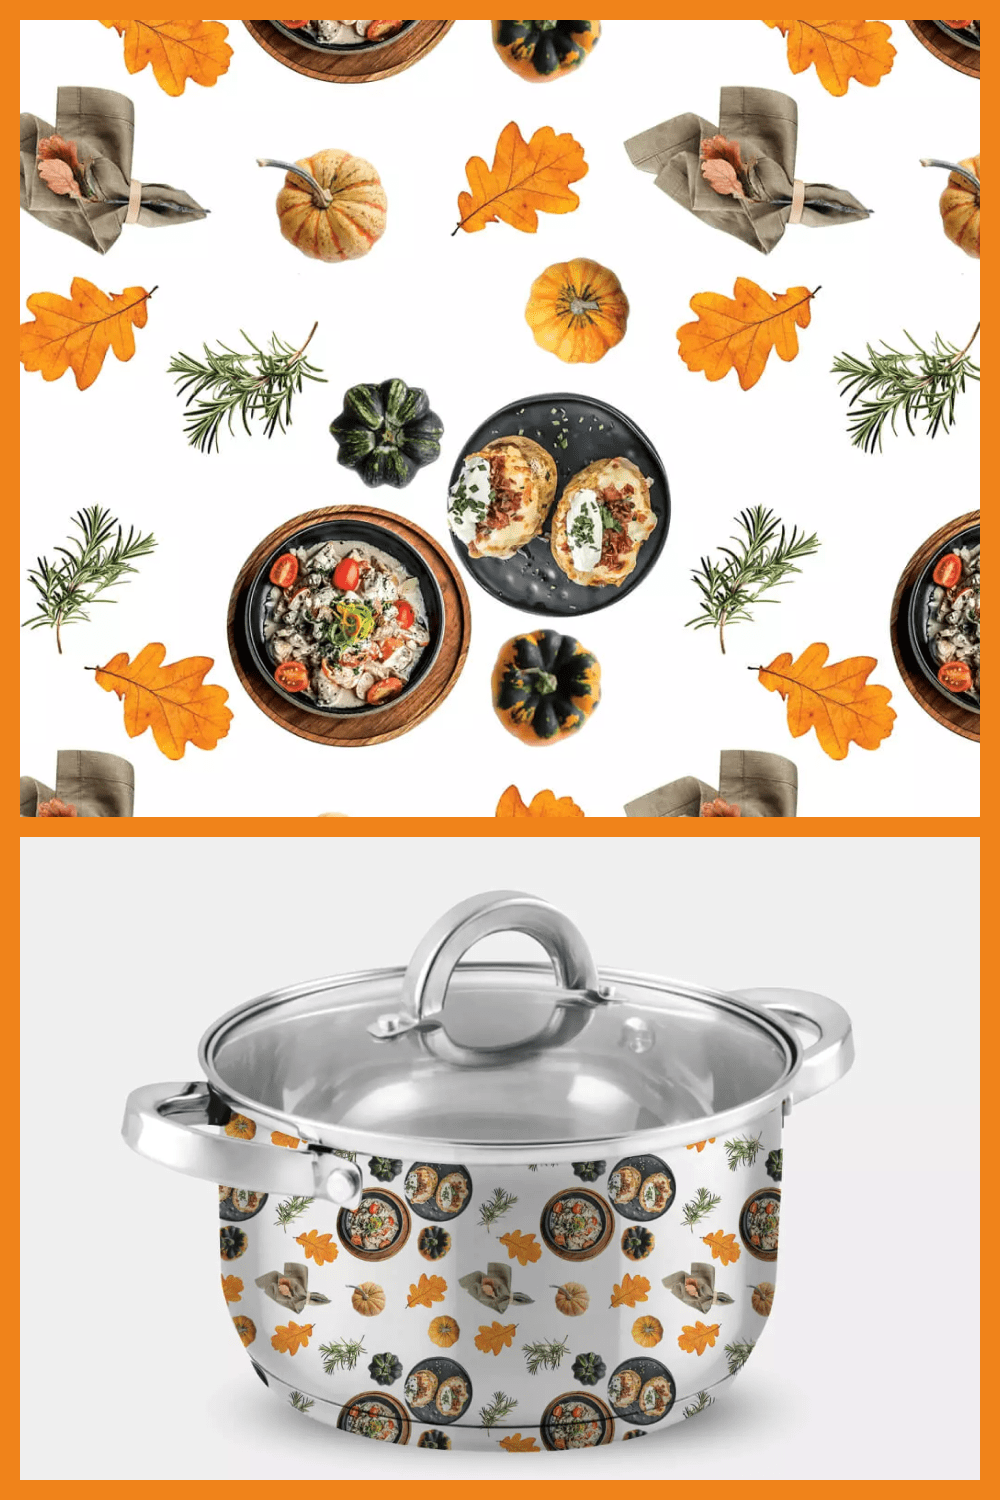 White saucepan with leaves, plates of food, pumpkins and twigs.